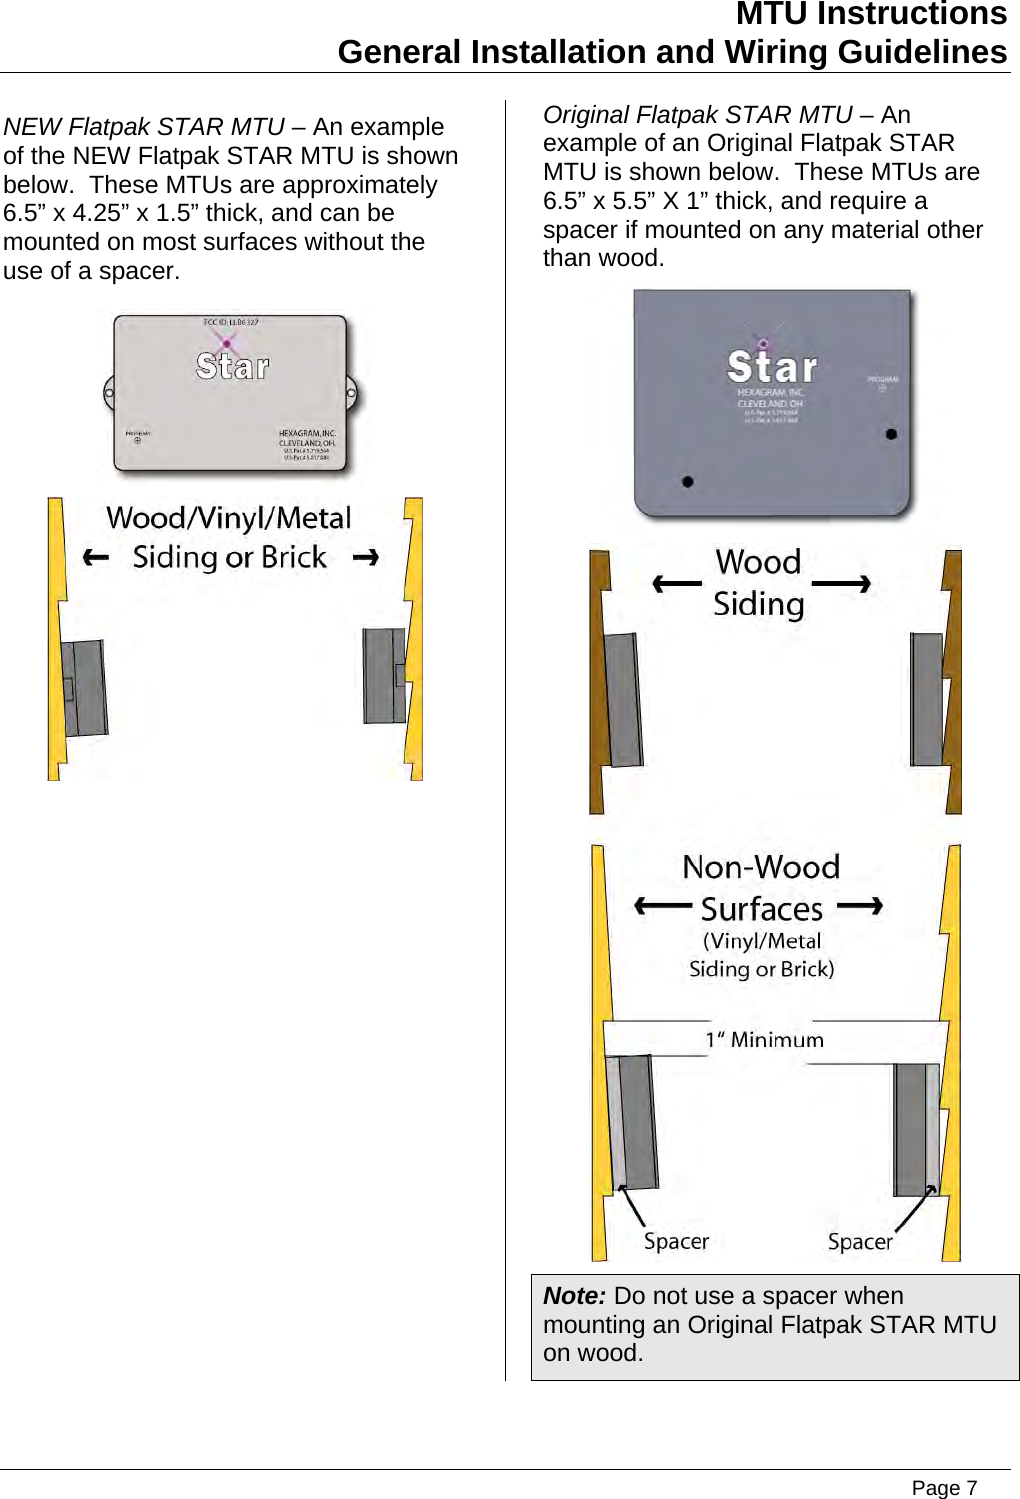 MTU Instructions General Installation and Wiring Guidelines NEW Flatpak STAR MTU – An example of the NEW Flatpak STAR MTU is shown below.  These MTUs are approximately 6.5” x 4.25” x 1.5” thick, and can be mounted on most surfaces without the use of a spacer.   Original Flatpak STAR MTU – An example of an Original Flatpak STAR MTU is shown below.  These MTUs are 6.5” x 5.5” X 1” thick, and require a spacer if mounted on any material other than wood.   Note: Do not use a spacer when mounting an Original Flatpak STAR MTU on wood.   Page 7